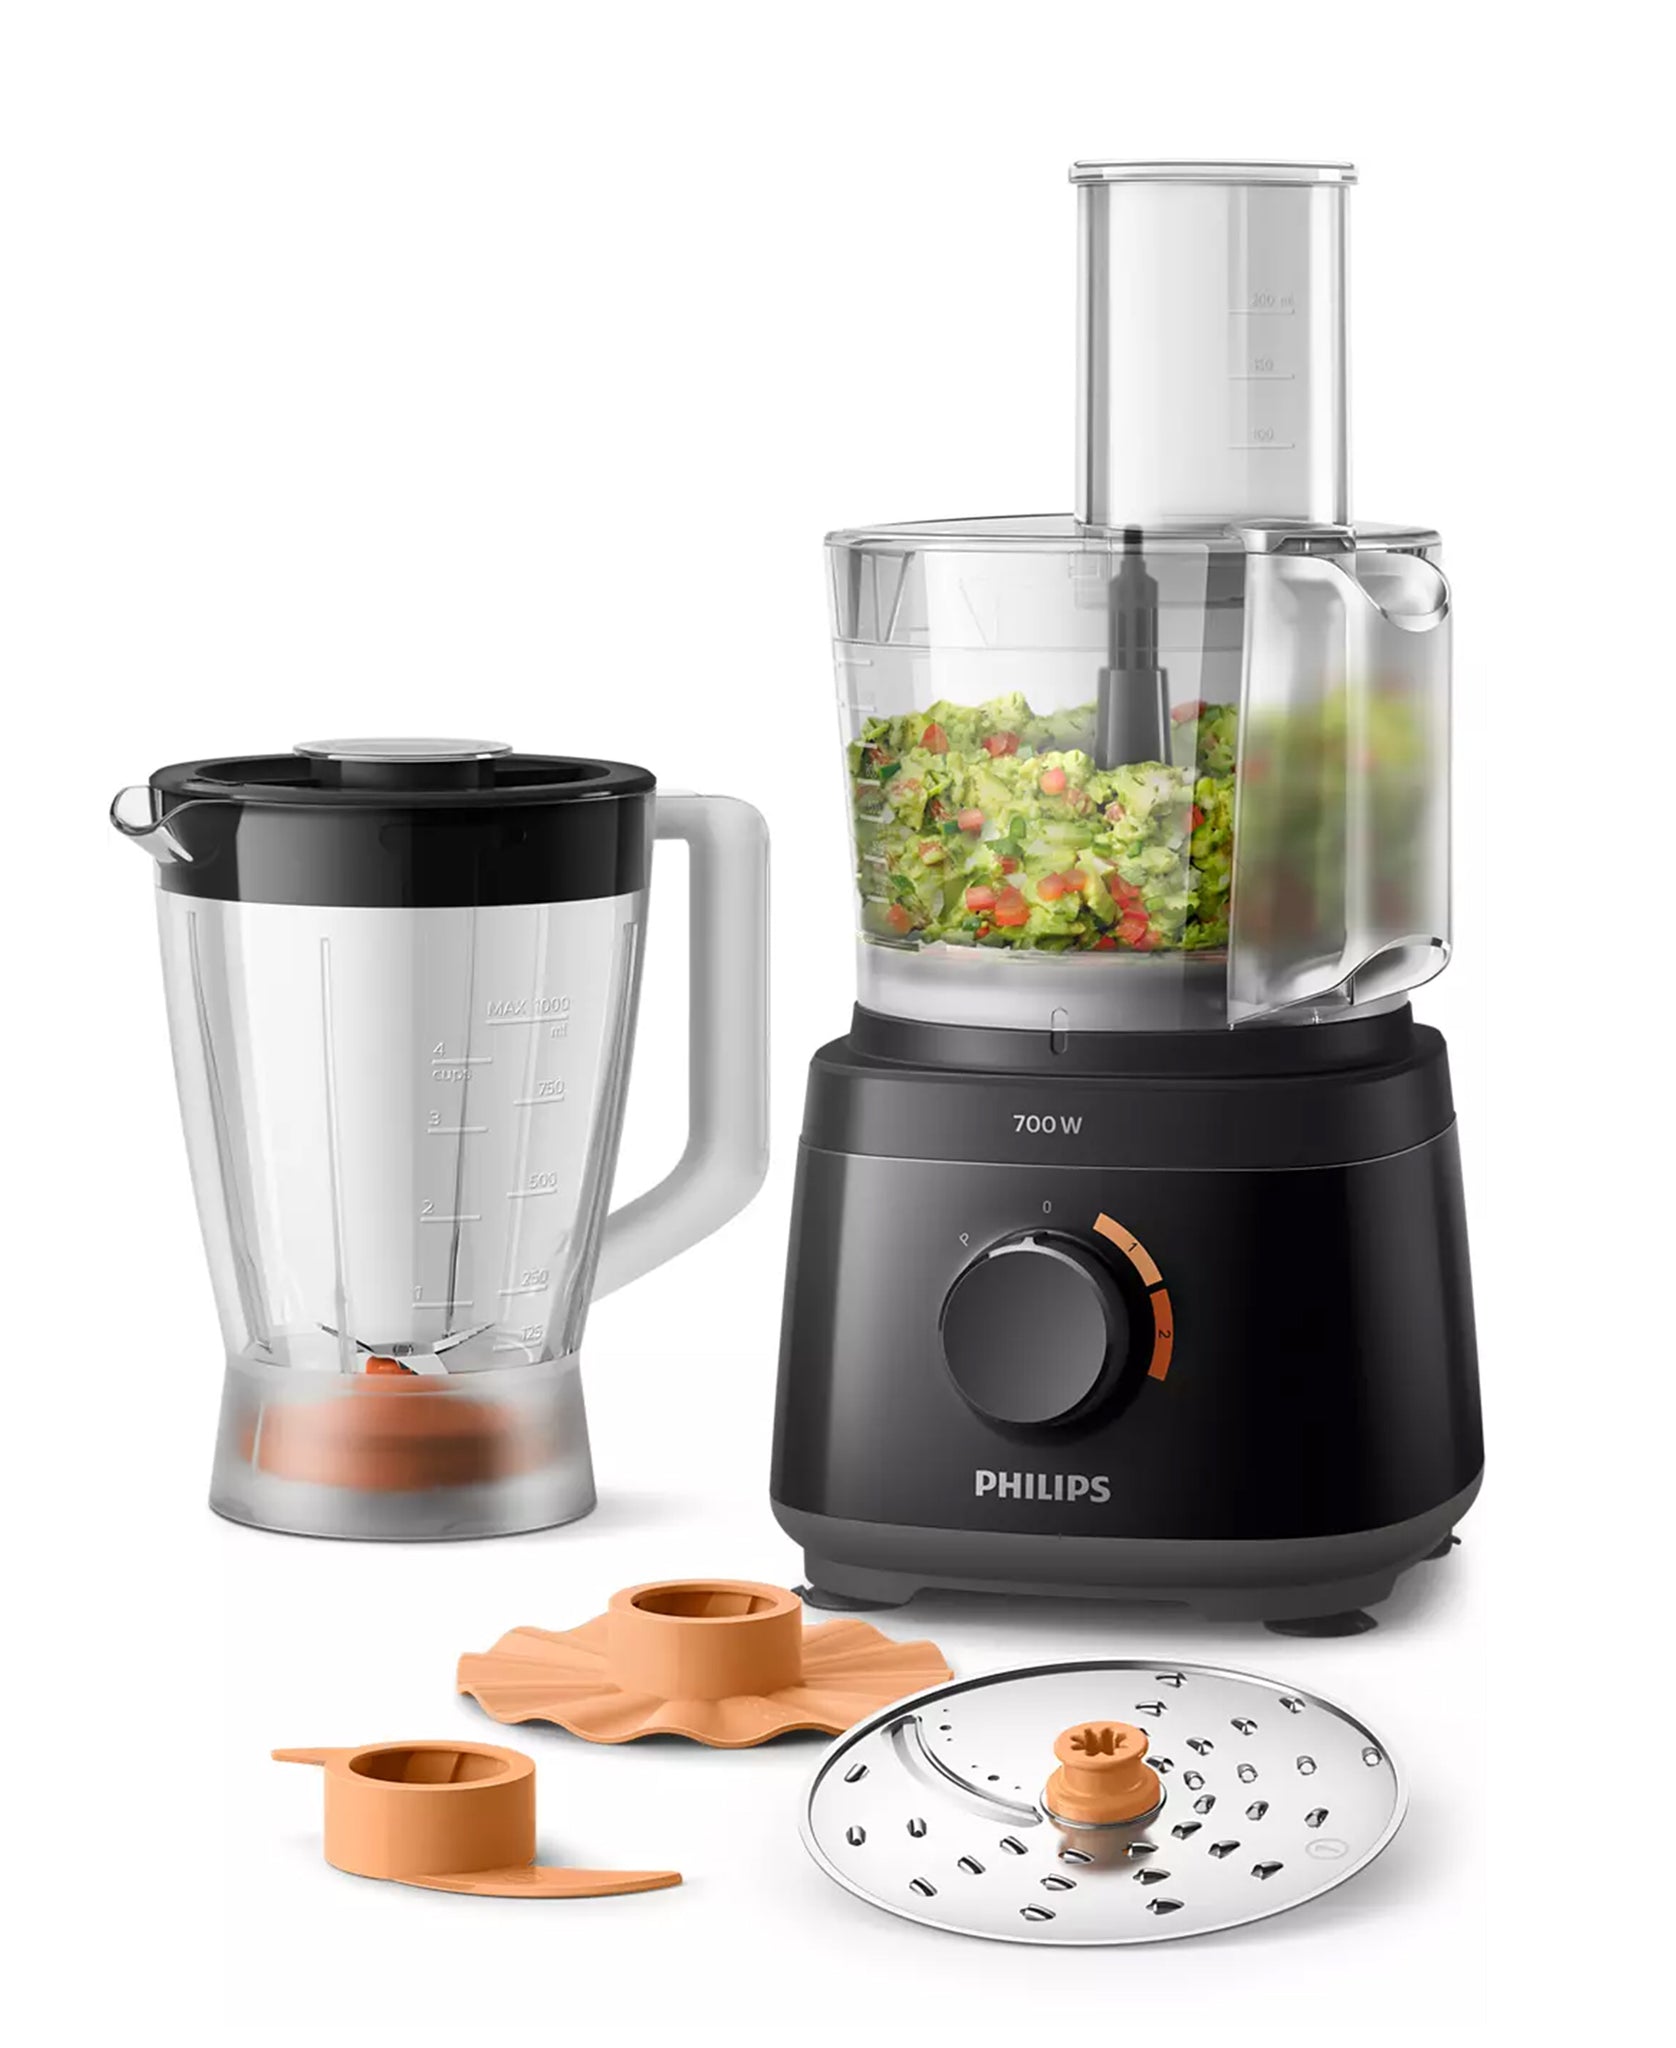 Philips Daily Collection Food Processor - Black